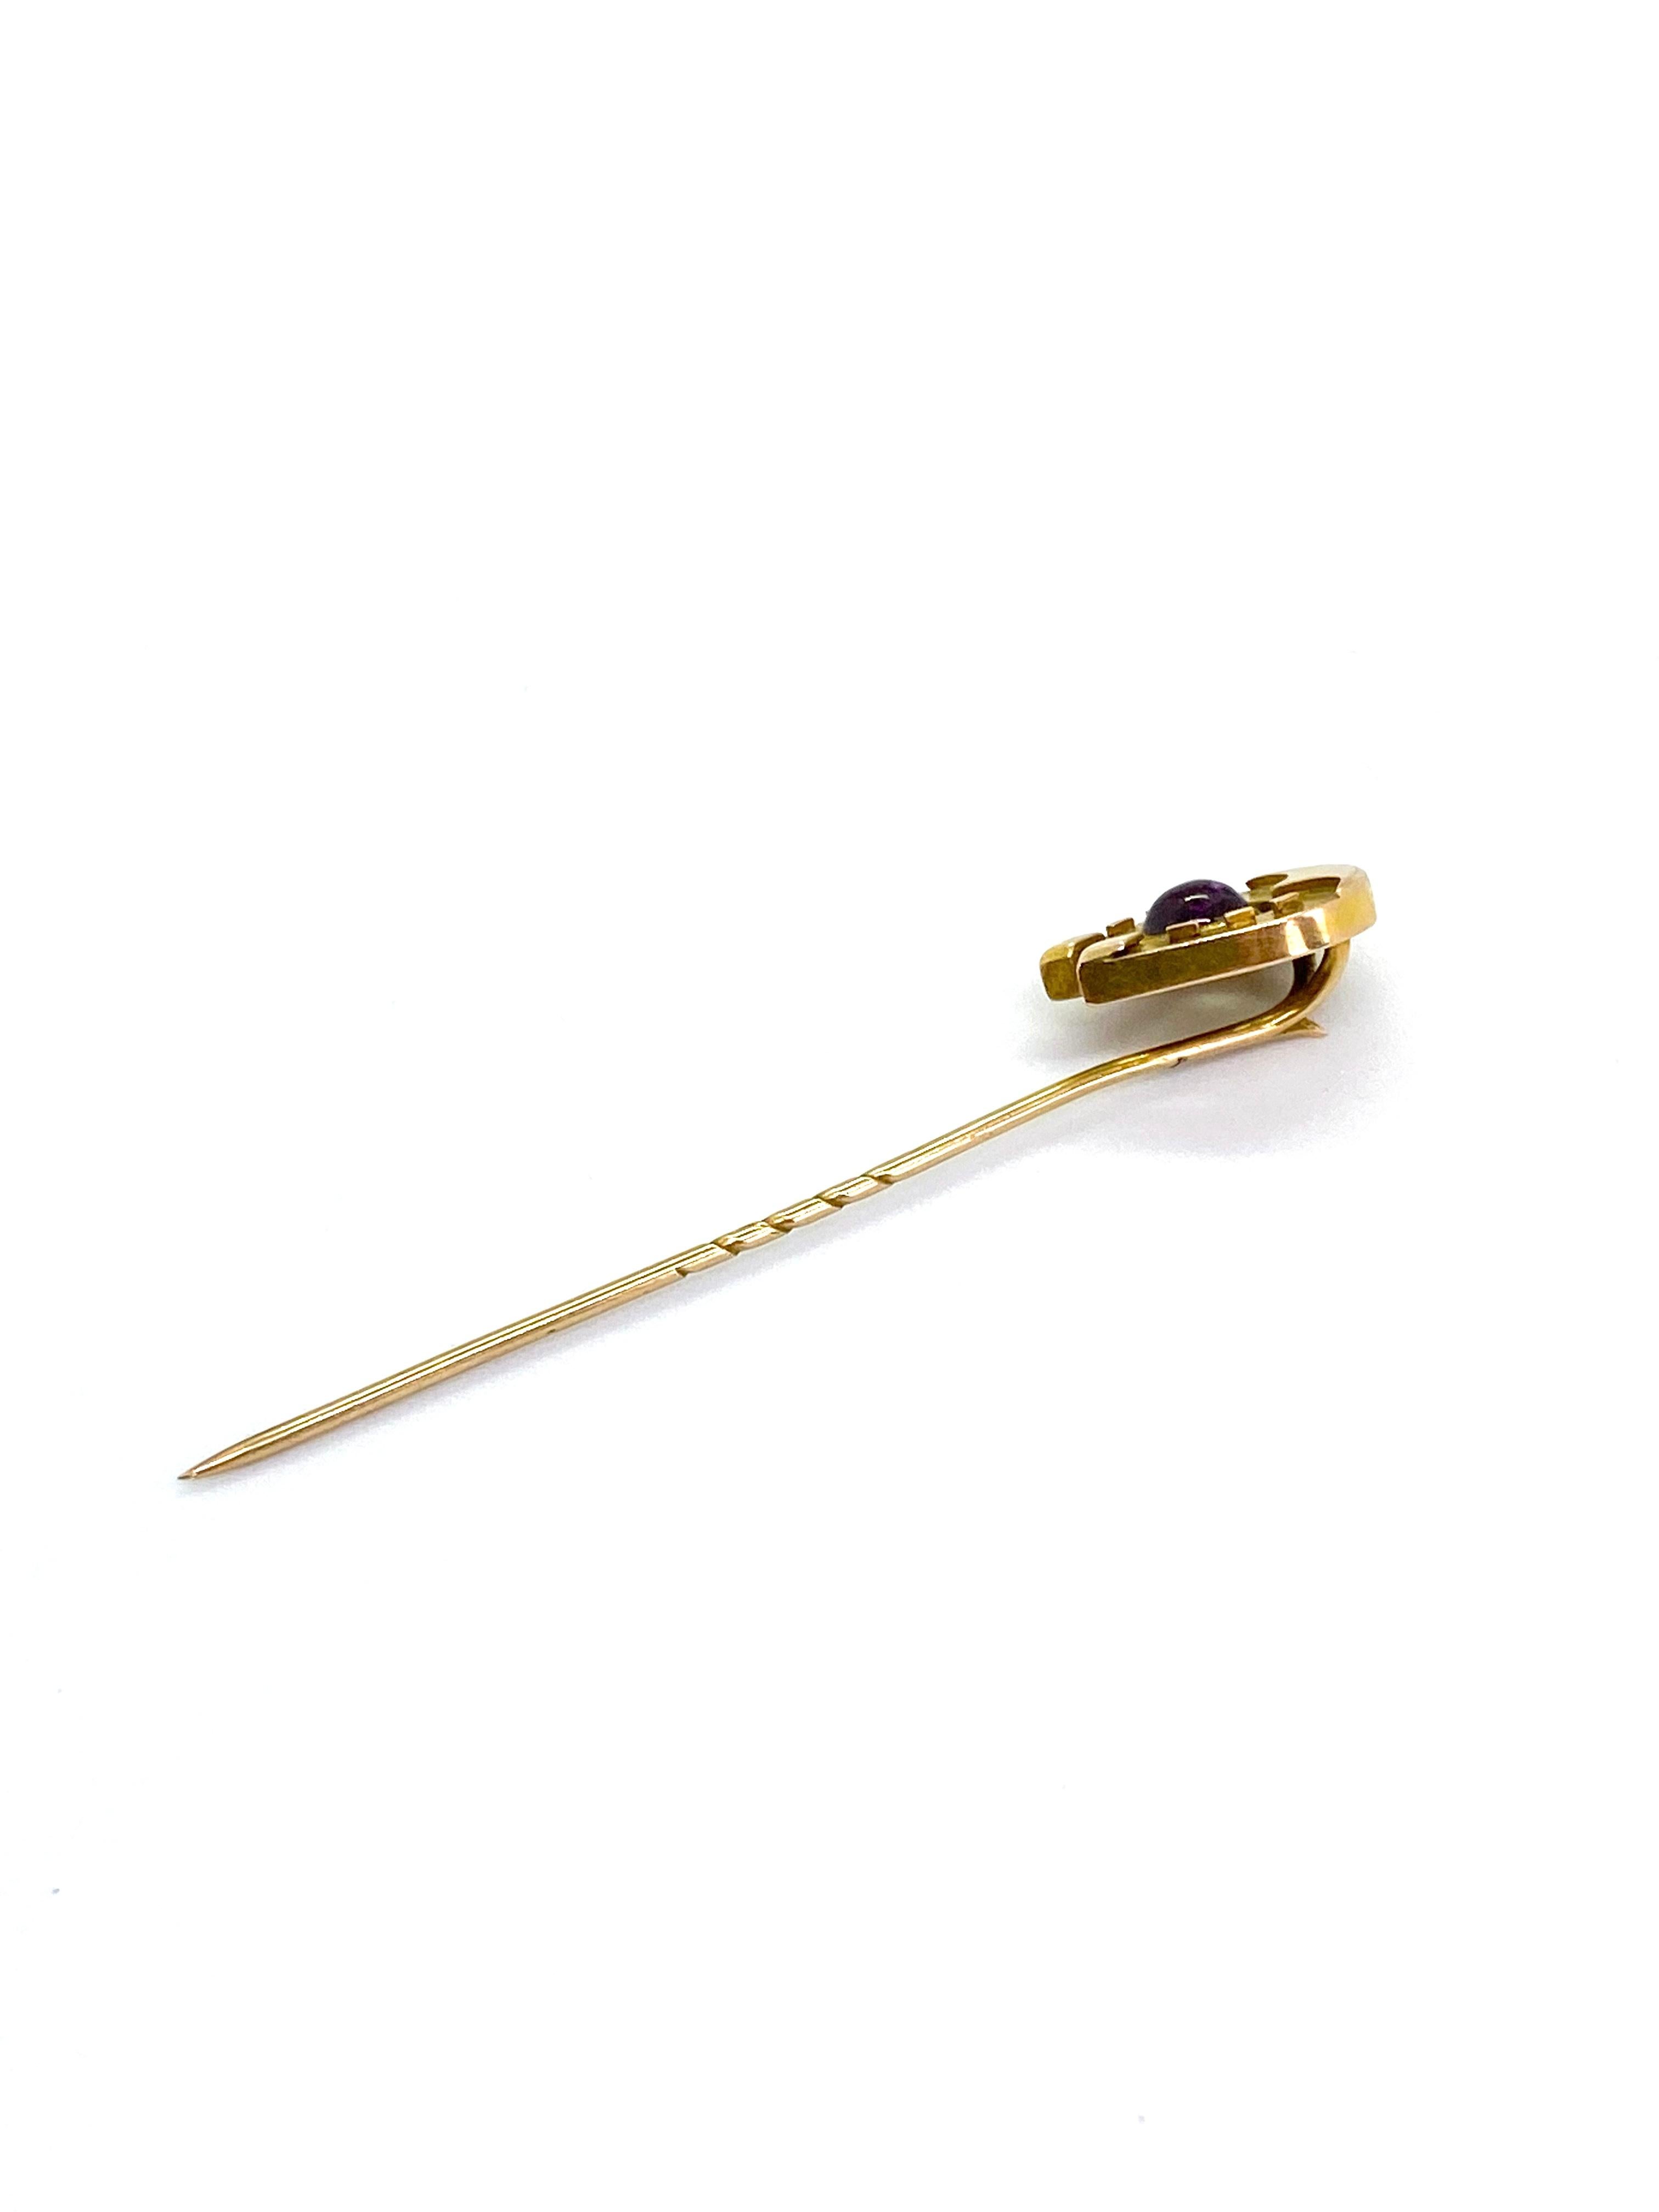 Stick Pin
14 Carat Yellow Gold Garnet Russia ? Horseshoe Stickpin
No Stamps.
Possibly Russia
Width 0.9 cm, Lenght  7 cm, Depth 1 cm